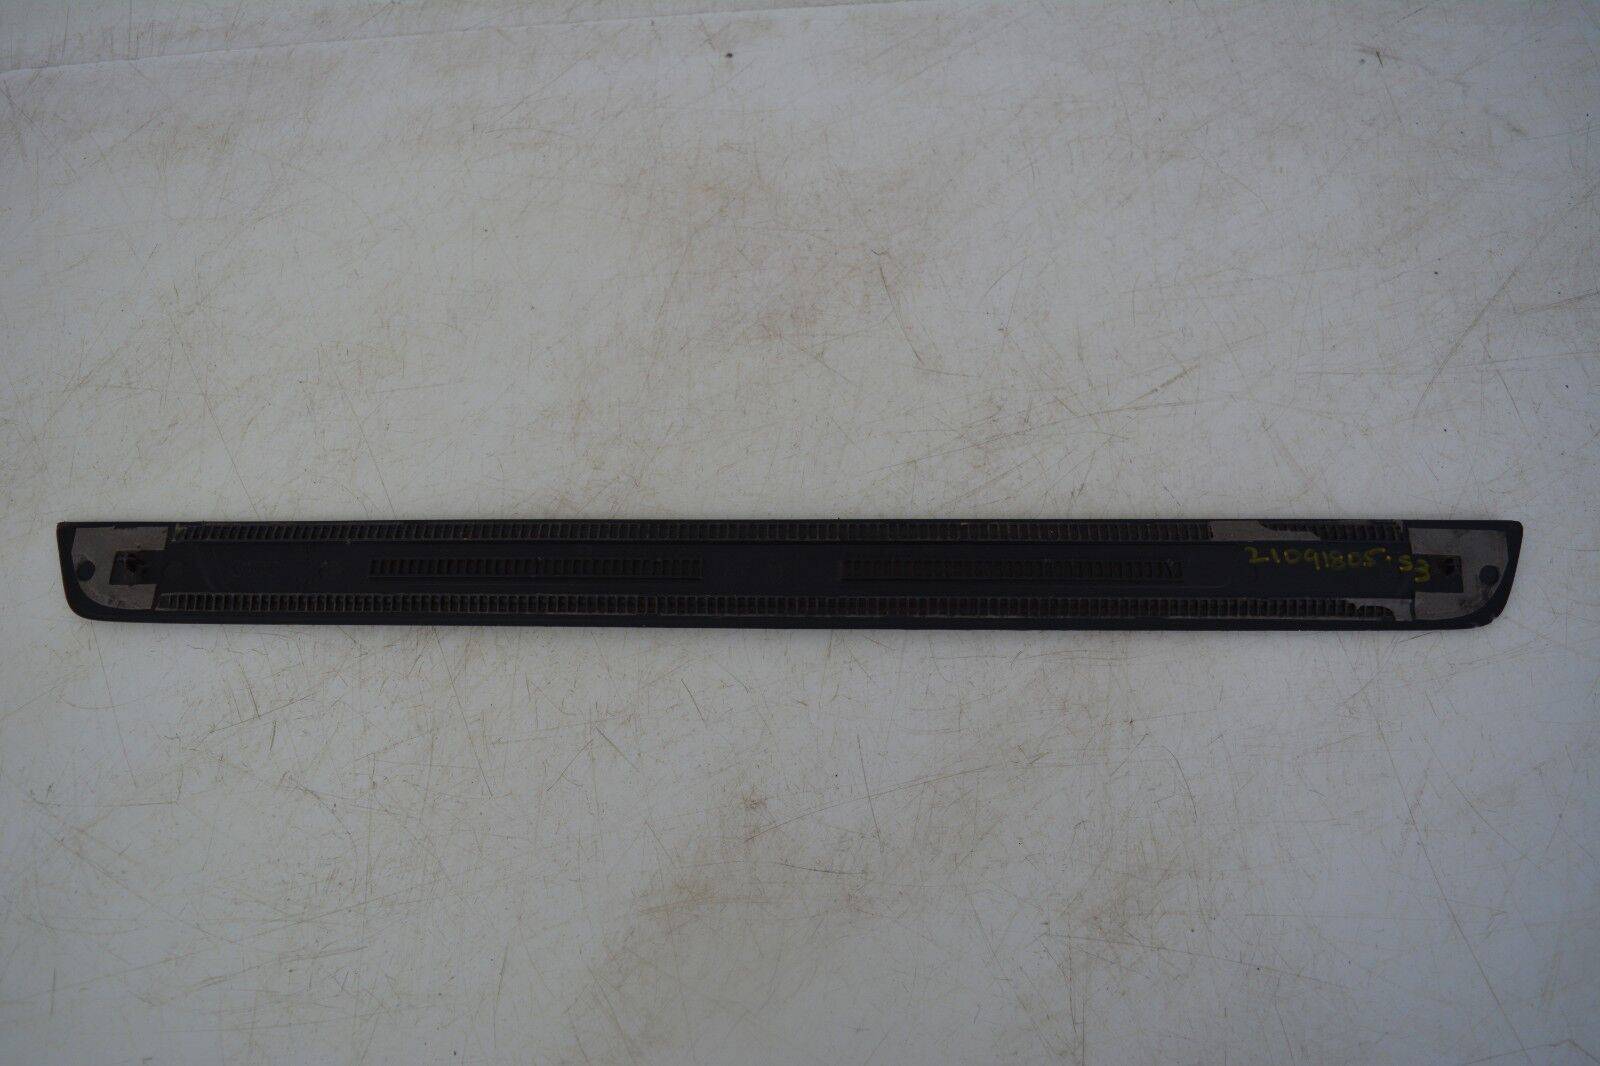 AUDI-A4-DOOR-SILL-ENTRY-TRIM-FRONT-LEFT-2015-2018-175367529874-6